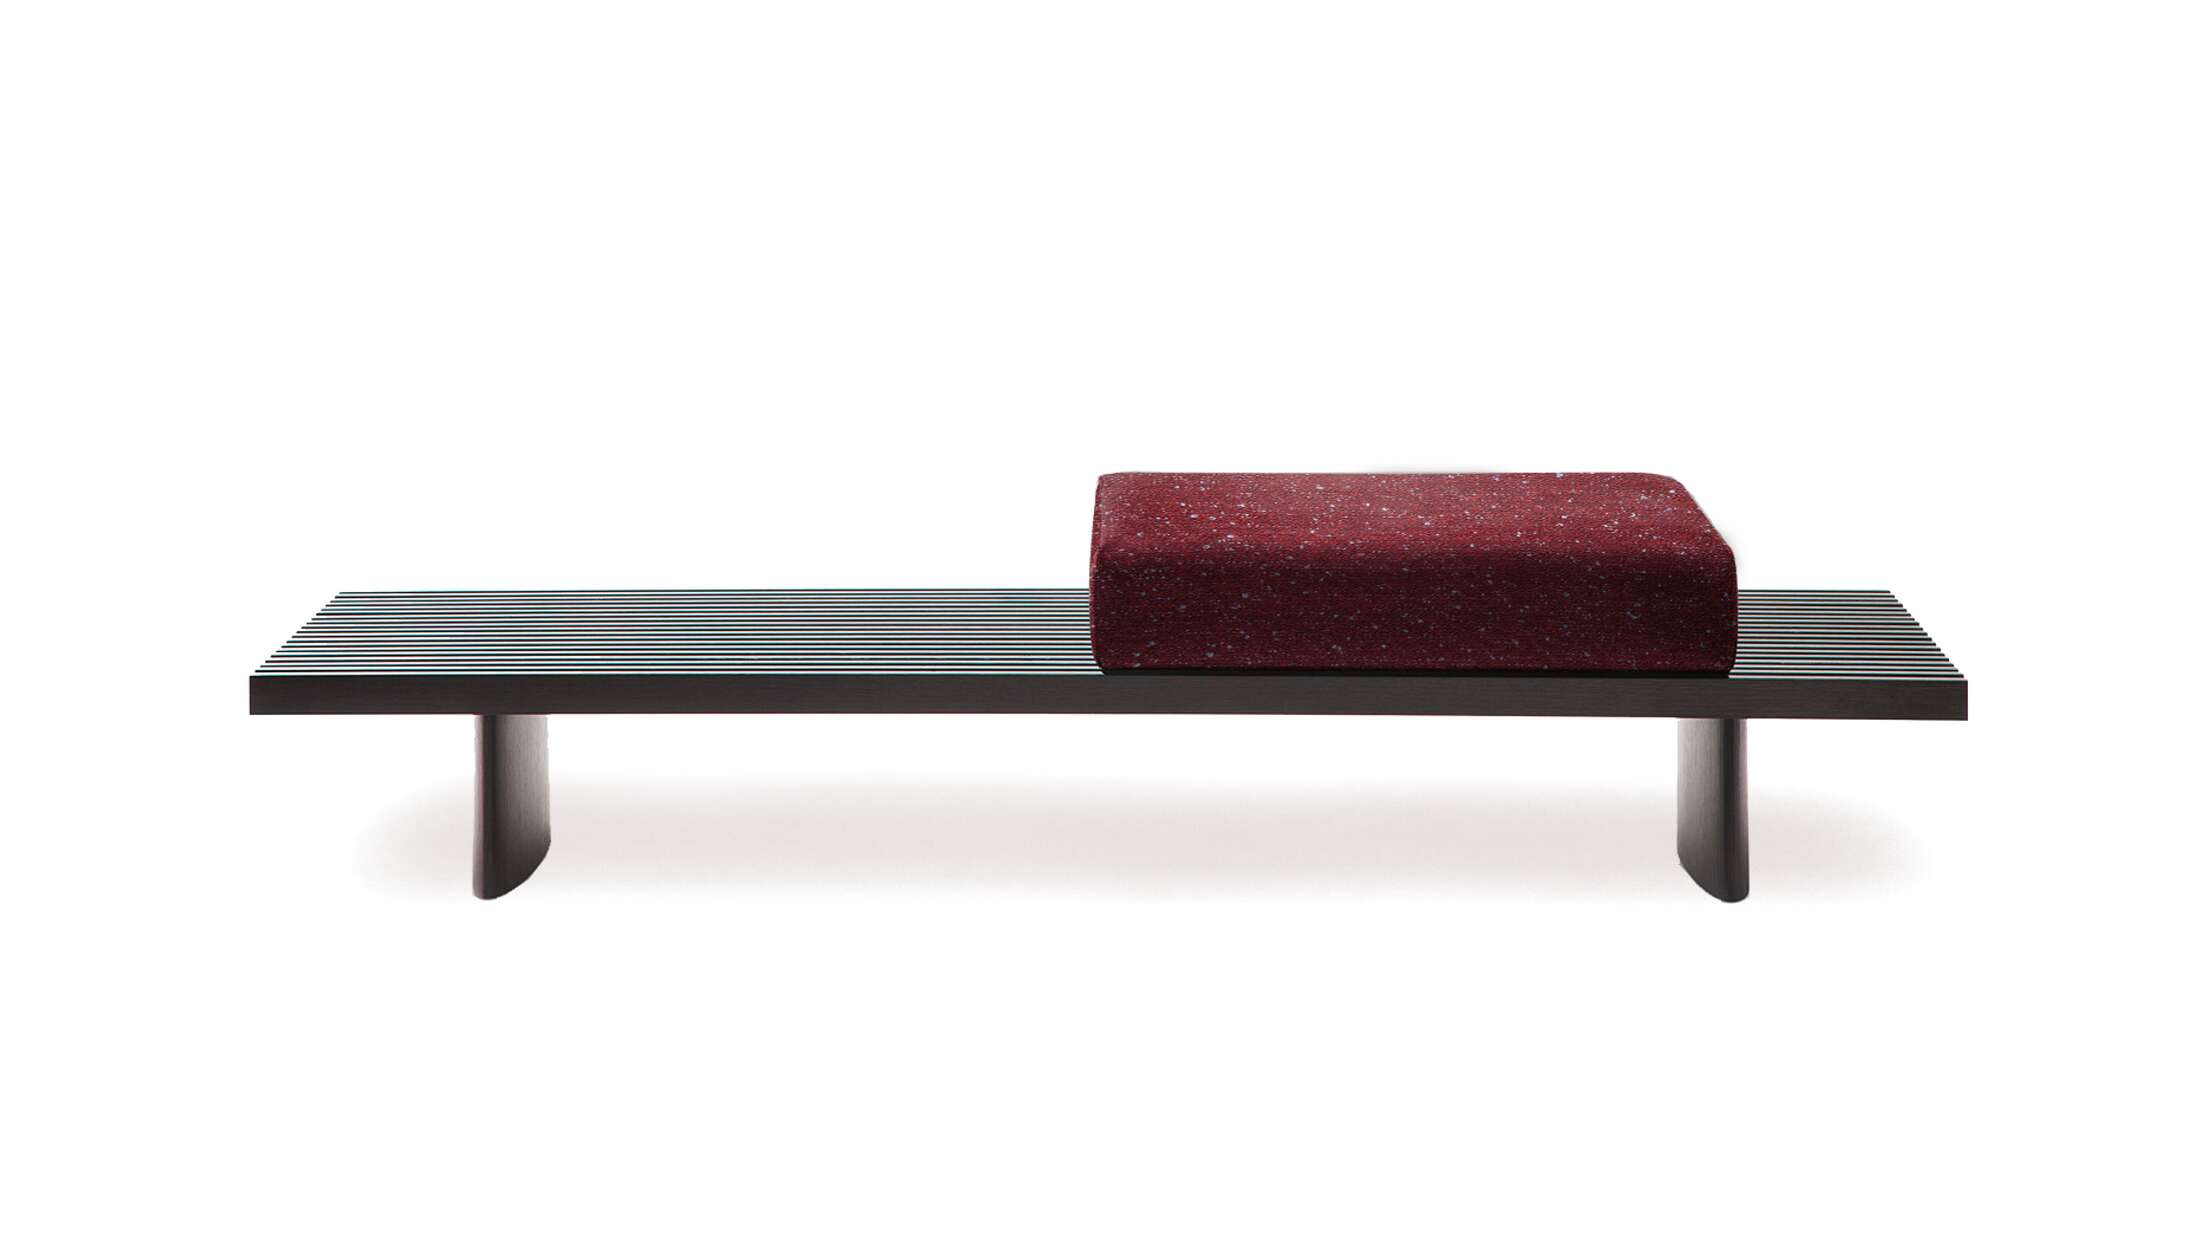 Low table that can also be used as a sofa or bench designed by Charlotte Perriand in 1953. Relaunched by Cassina in 2004.  Manufactured by Cassina in Italy. The price given applies to the piece as shown in the first picture. Prices vary dependent on